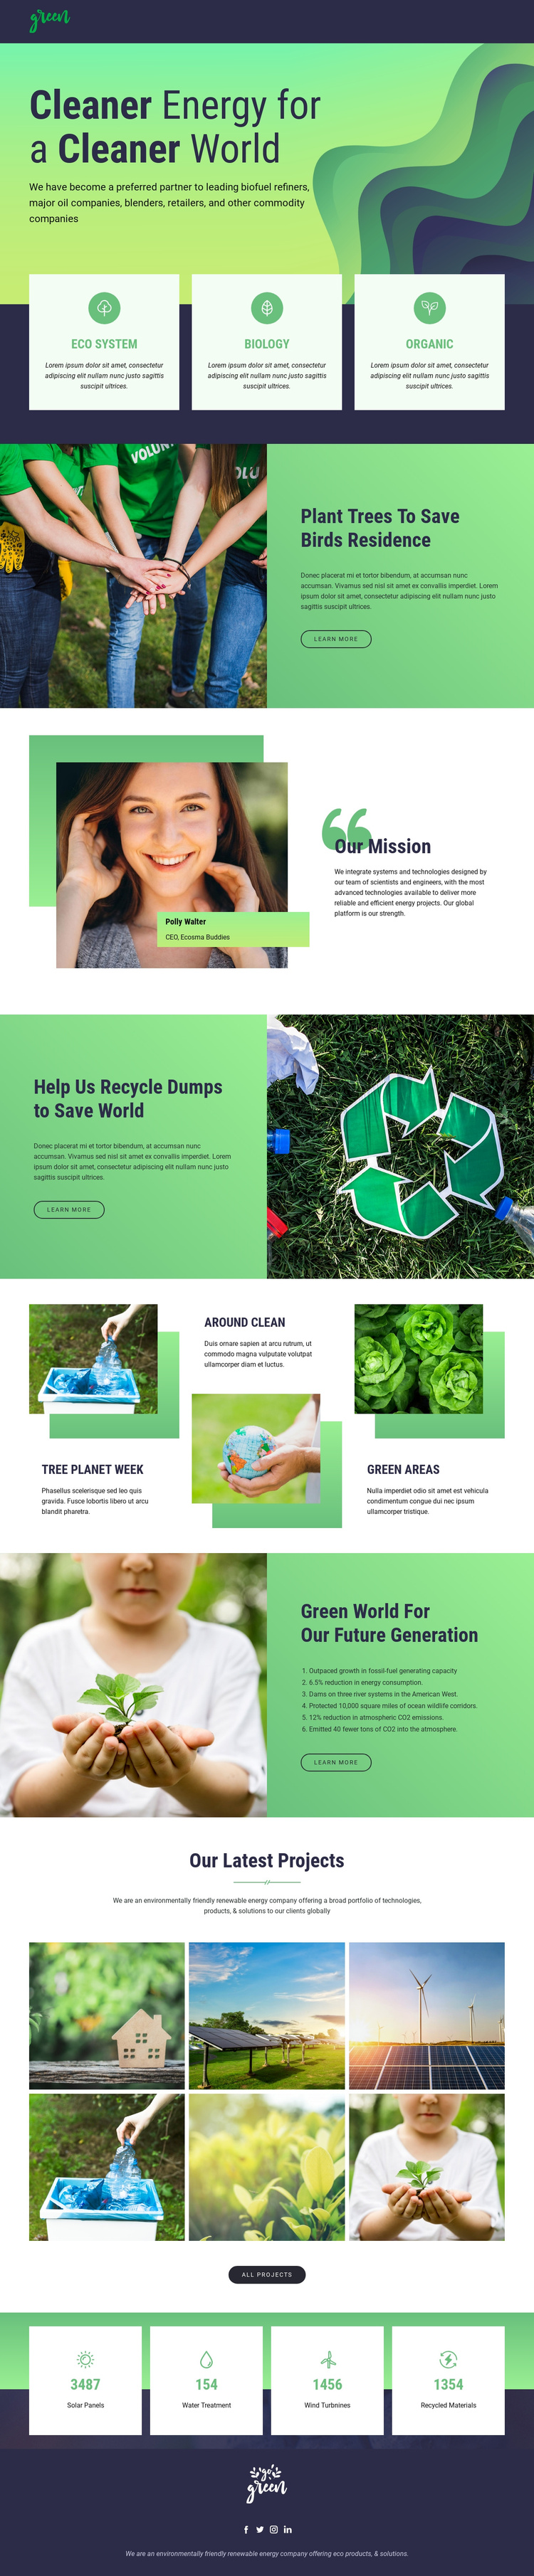 Clean energy to save nature Joomla Template